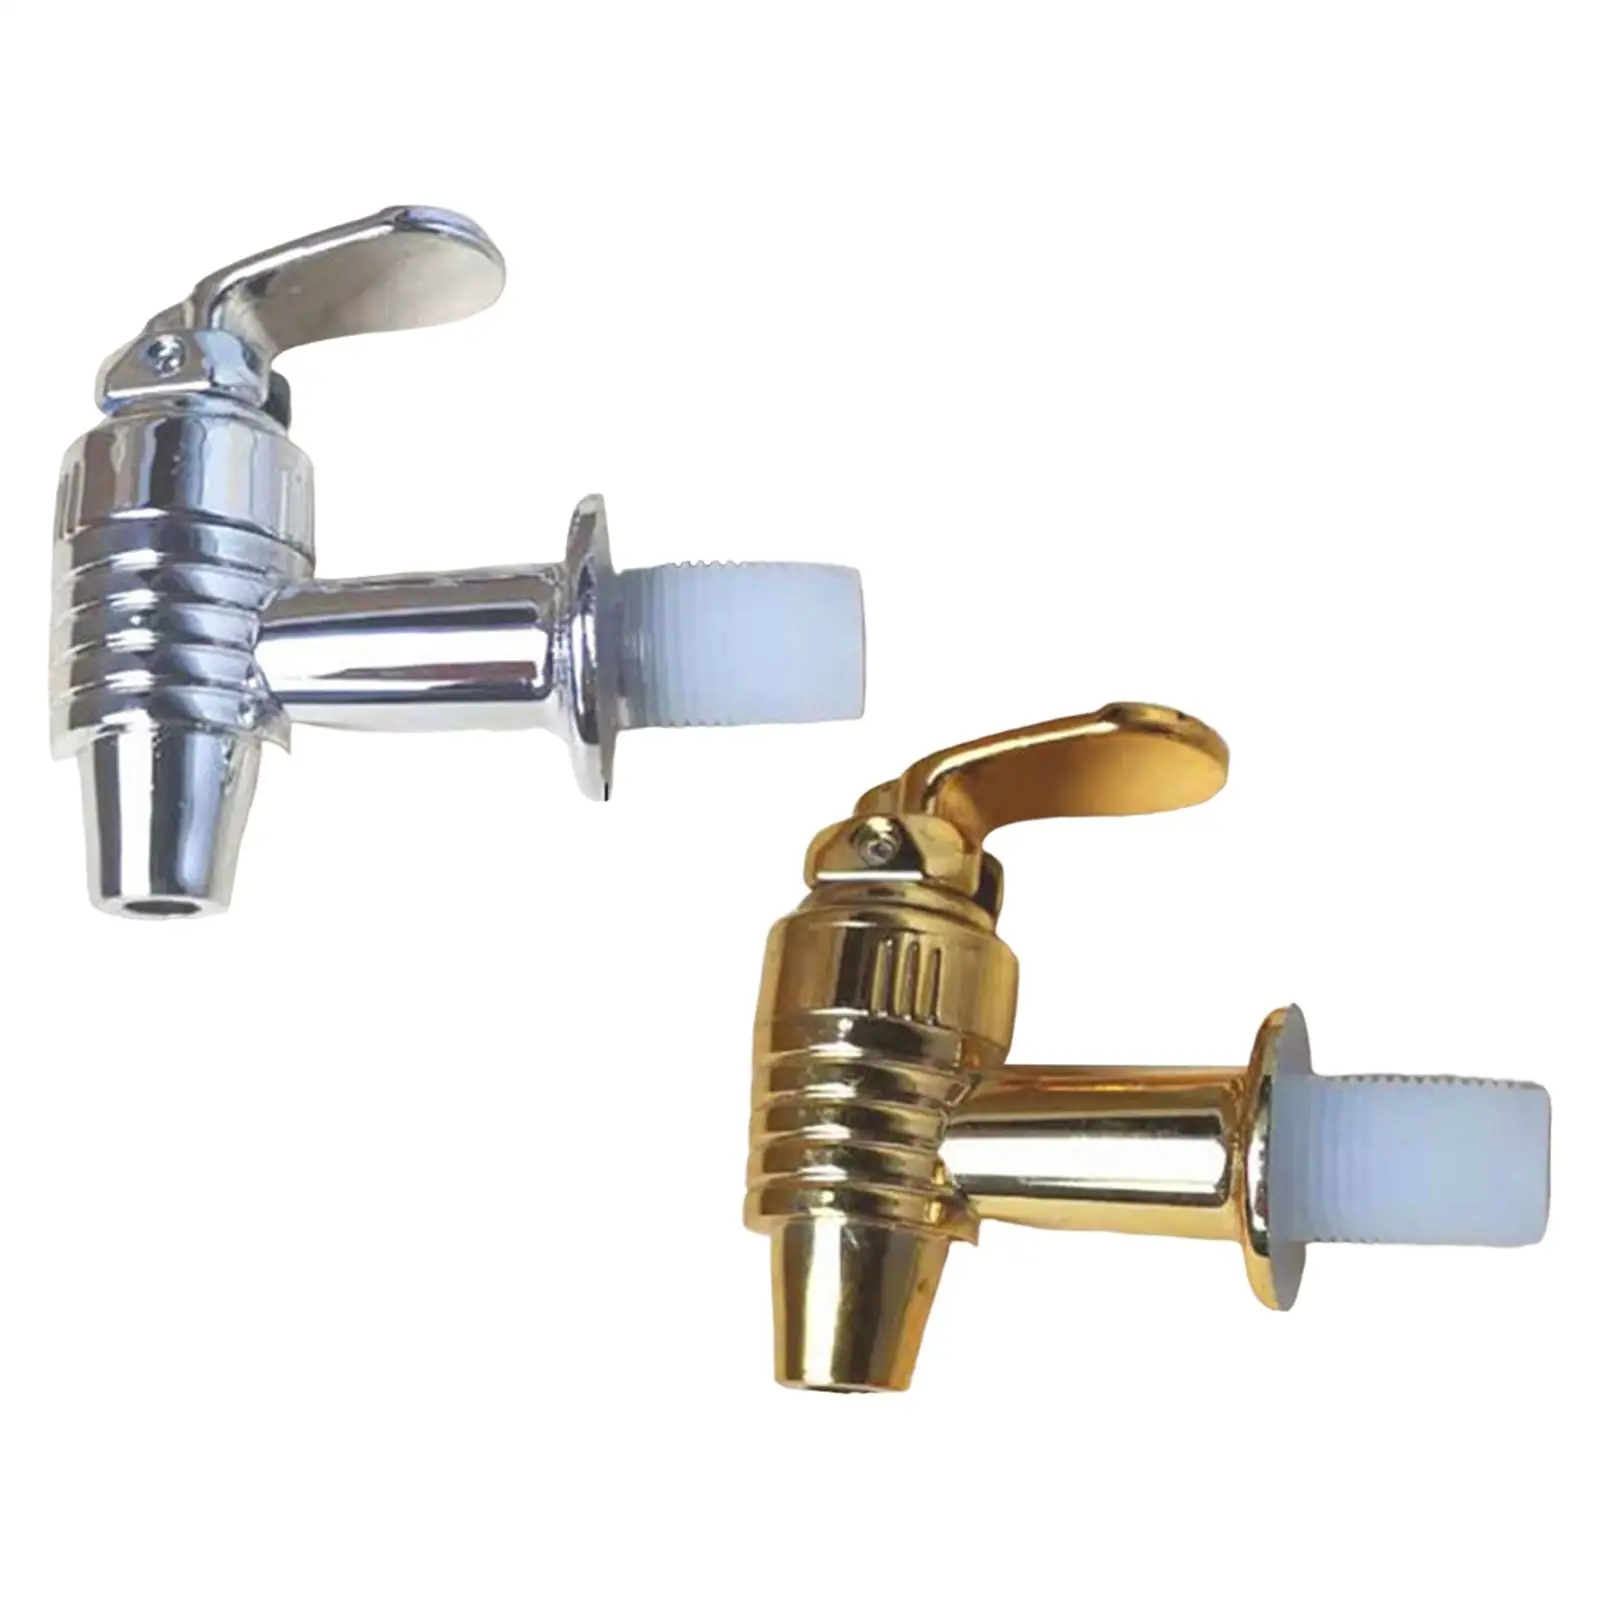 Replacement Cooler Faucet Water Dispenser Tap ABS, for Filtered Water Dispensers Pour Dispenser Valve Multi Function Accessories